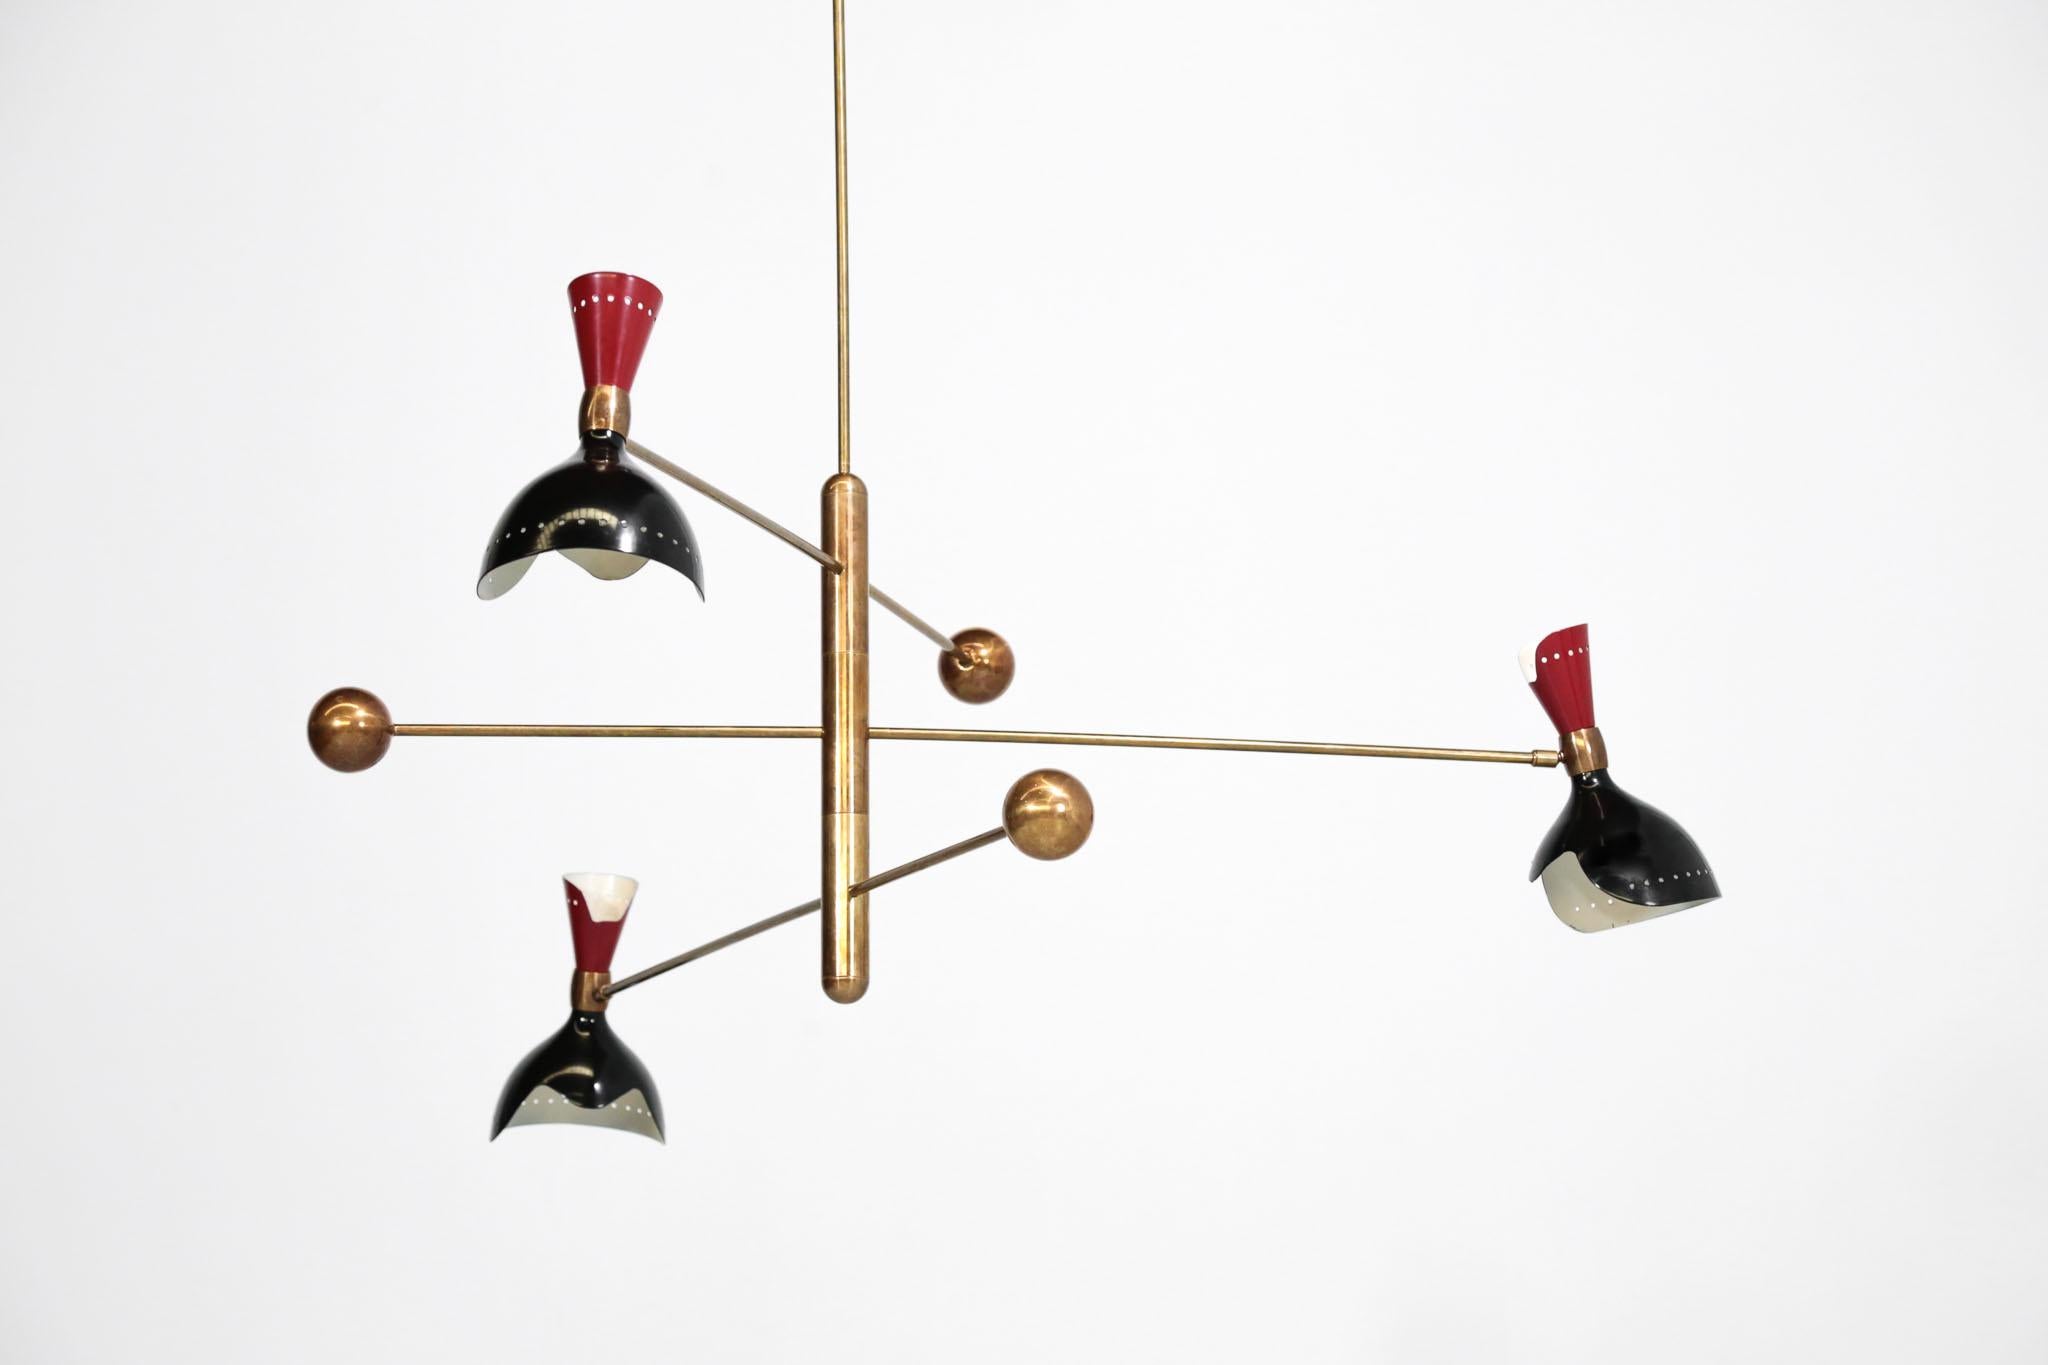 Rare chandelier attributed to Stilnovo.
Composed of three adjustable arms with counter weight.
Made of brass and metal lampshades, black and red.
E14 and E24 bulbs.
Excellent condition.